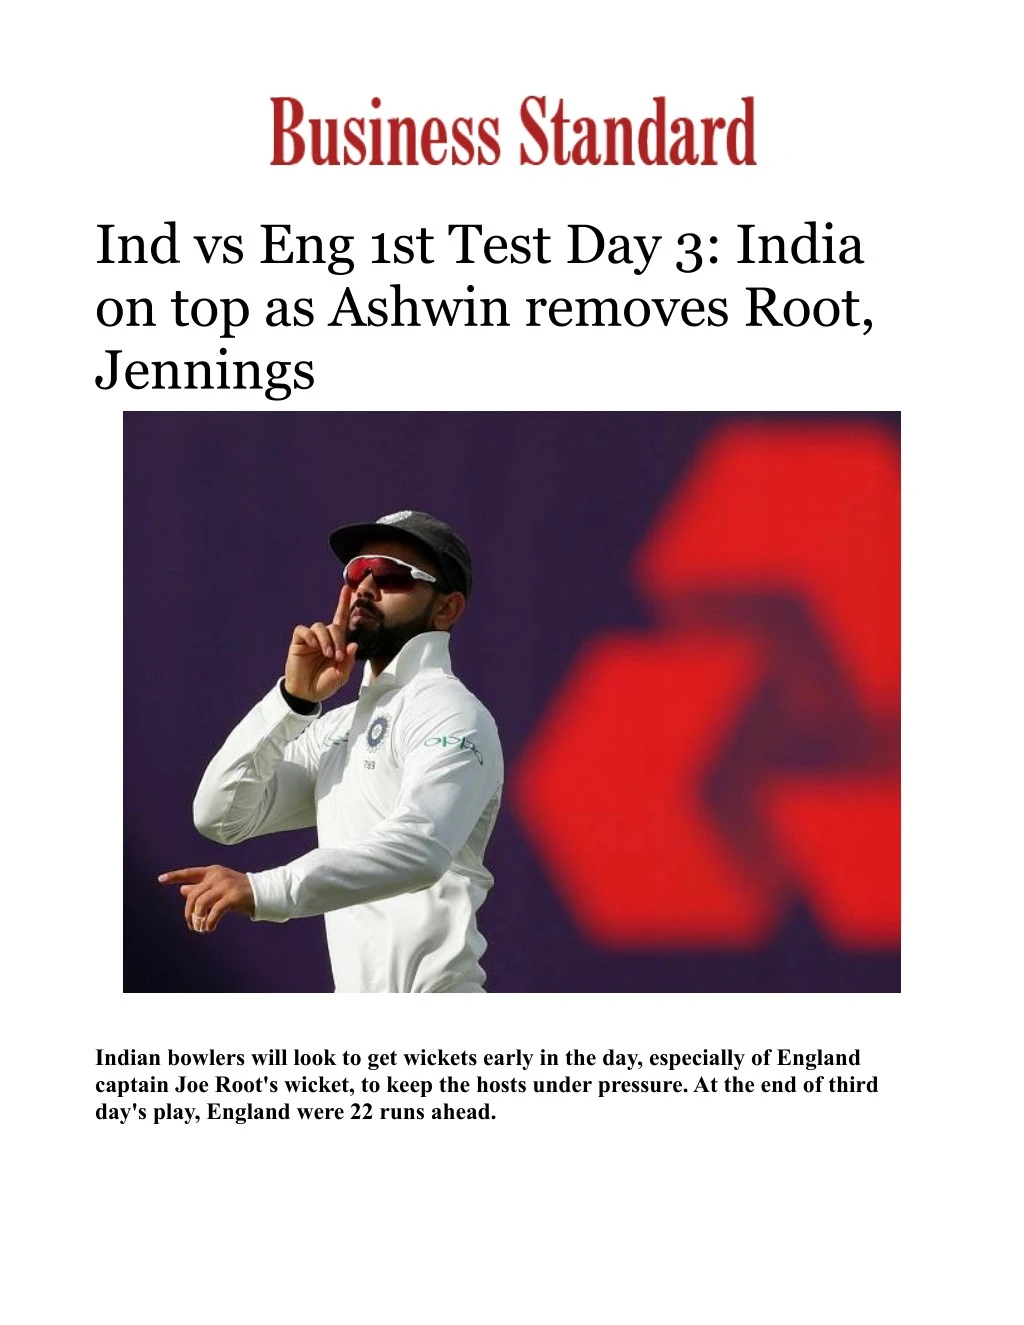 ind vs eng 1st test day 3 india on top as ashwin